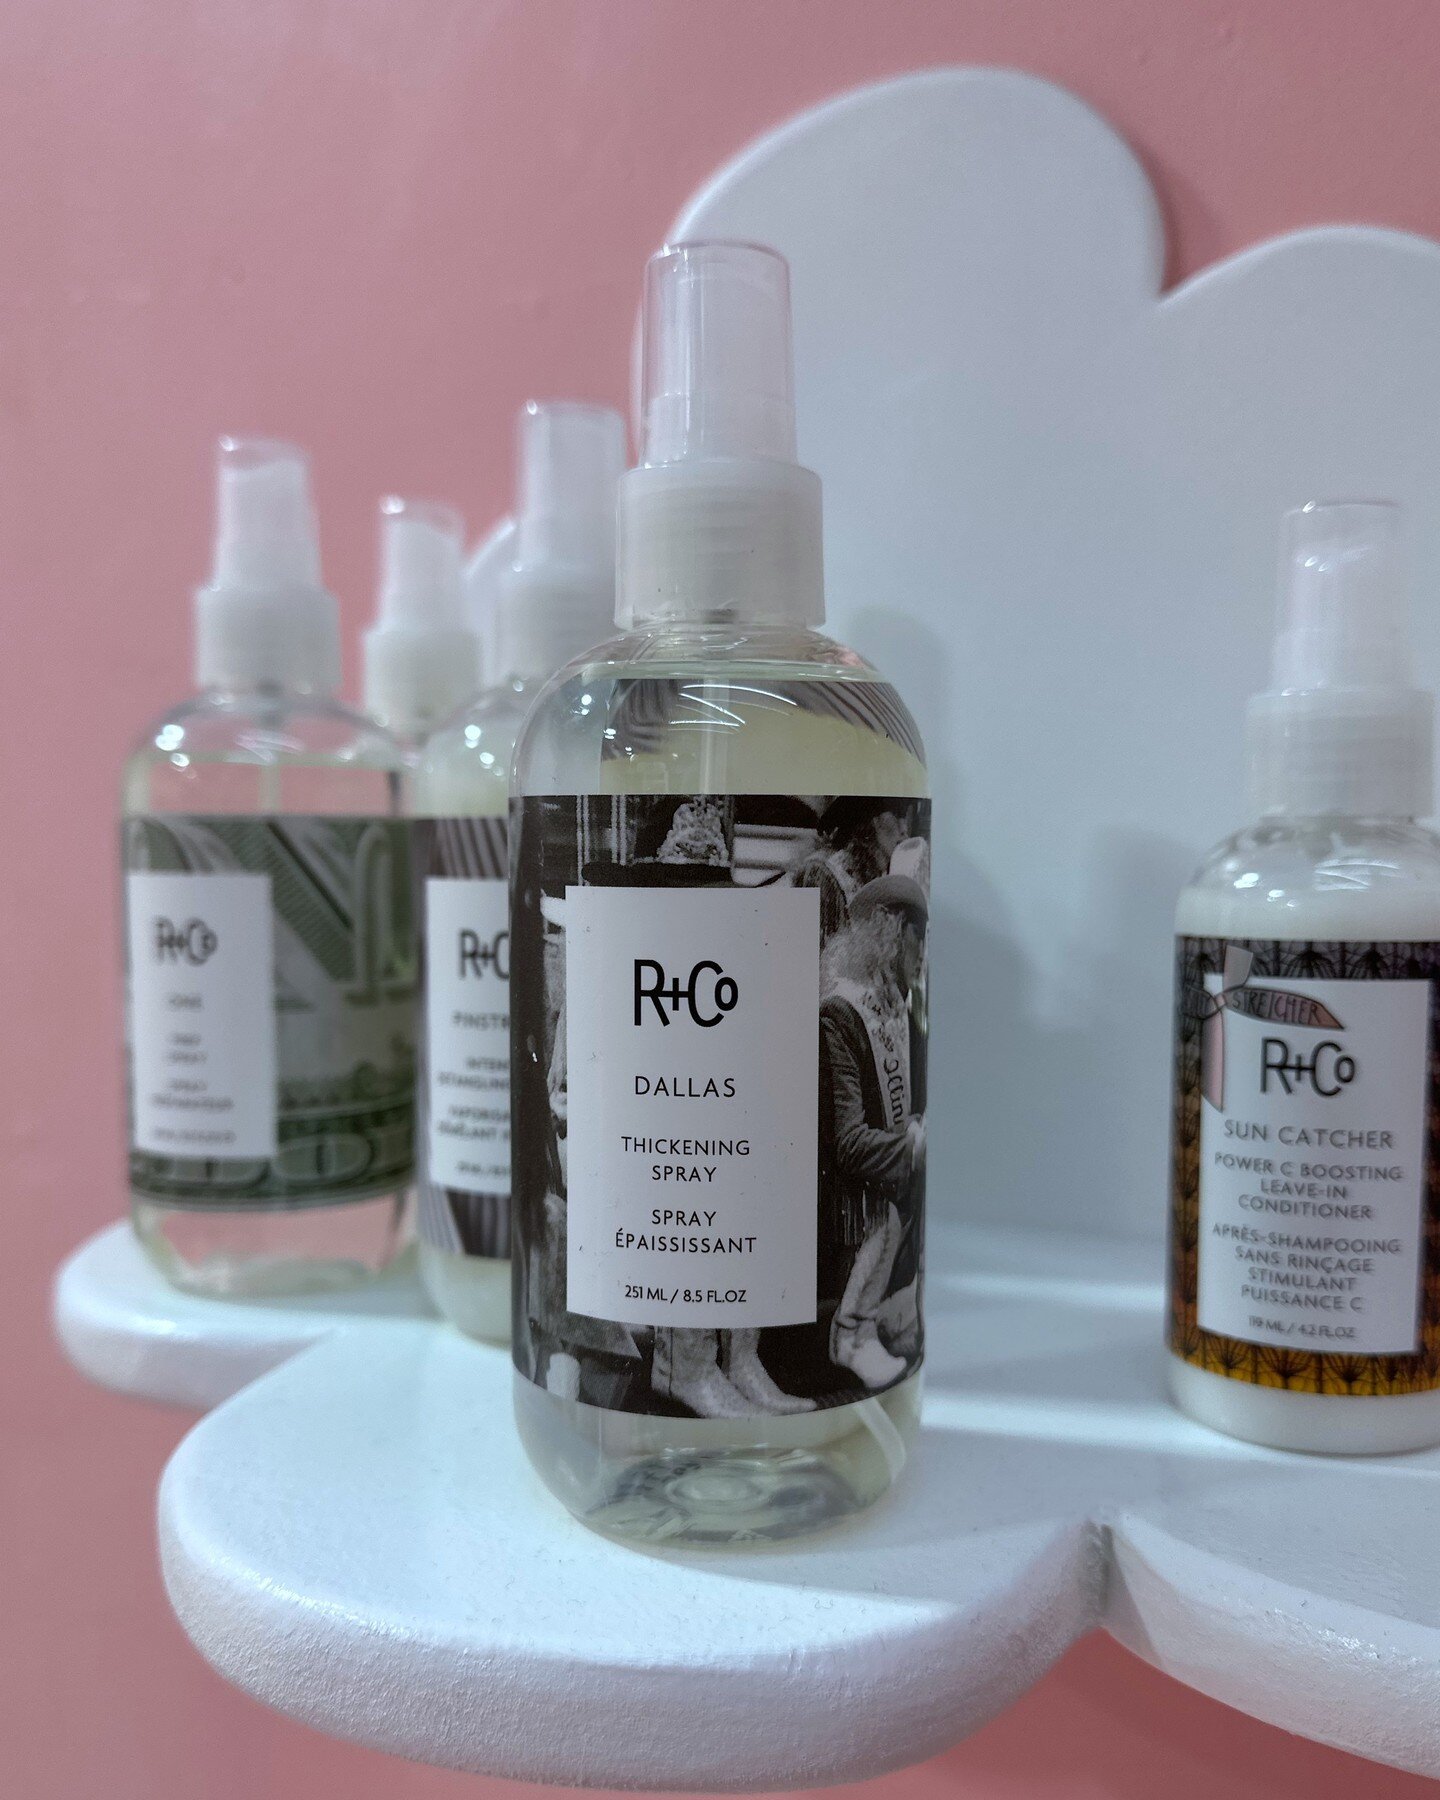 Say goodbye to flat hair and hello to bouncy, voluminous locks with Dallas Thickening Spray by R+Co! 🙌 

Infused with hydrolyzed vegetable protein and vitamin E, this magical spray not only gives your hair extra volume and texture, but also nourishe